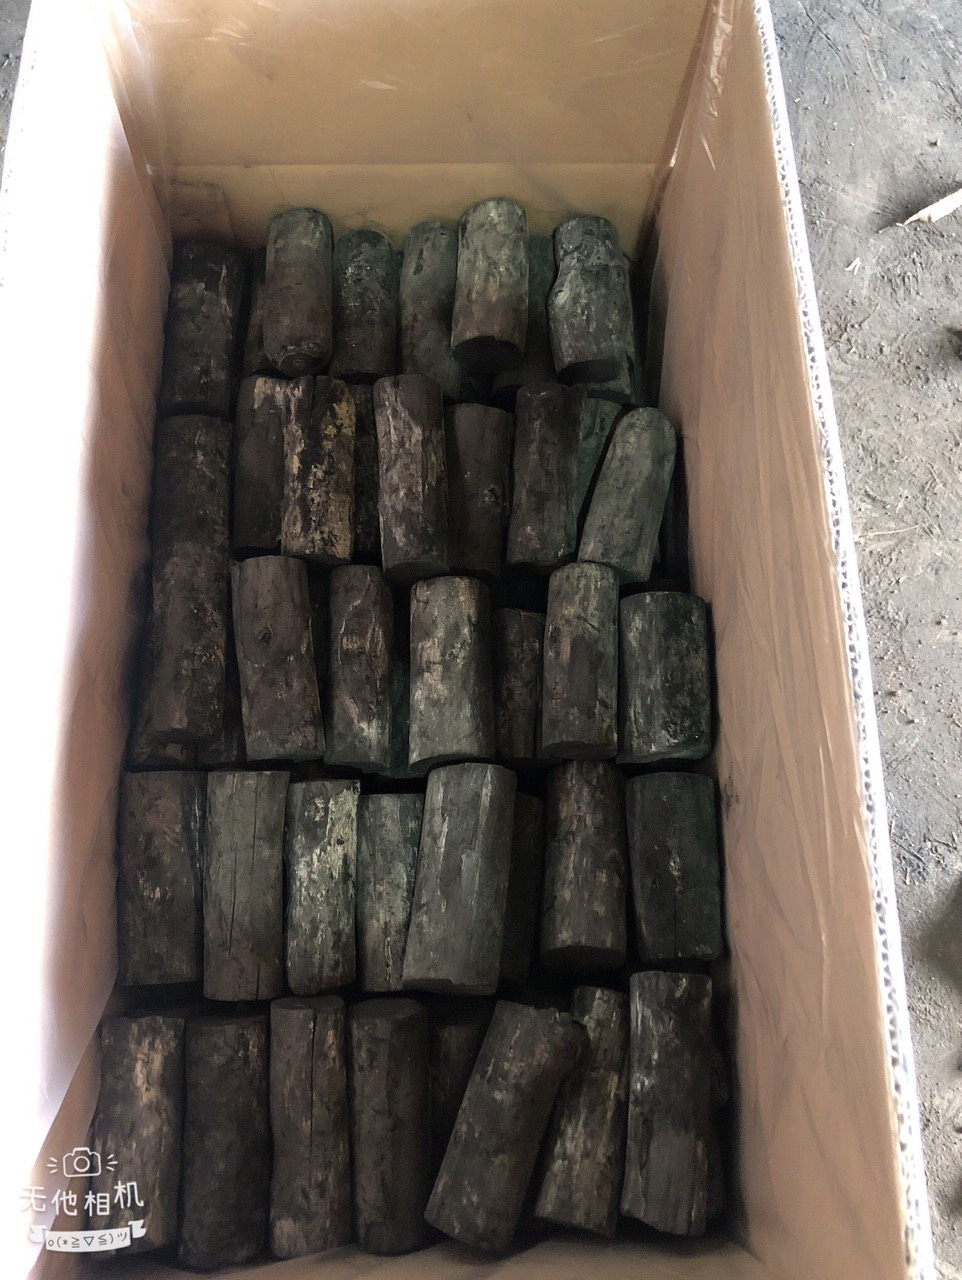 Black Charcoal Briquette High Specification & Best Choice Fast Burning Using For Many Industries Carb Customized Packing